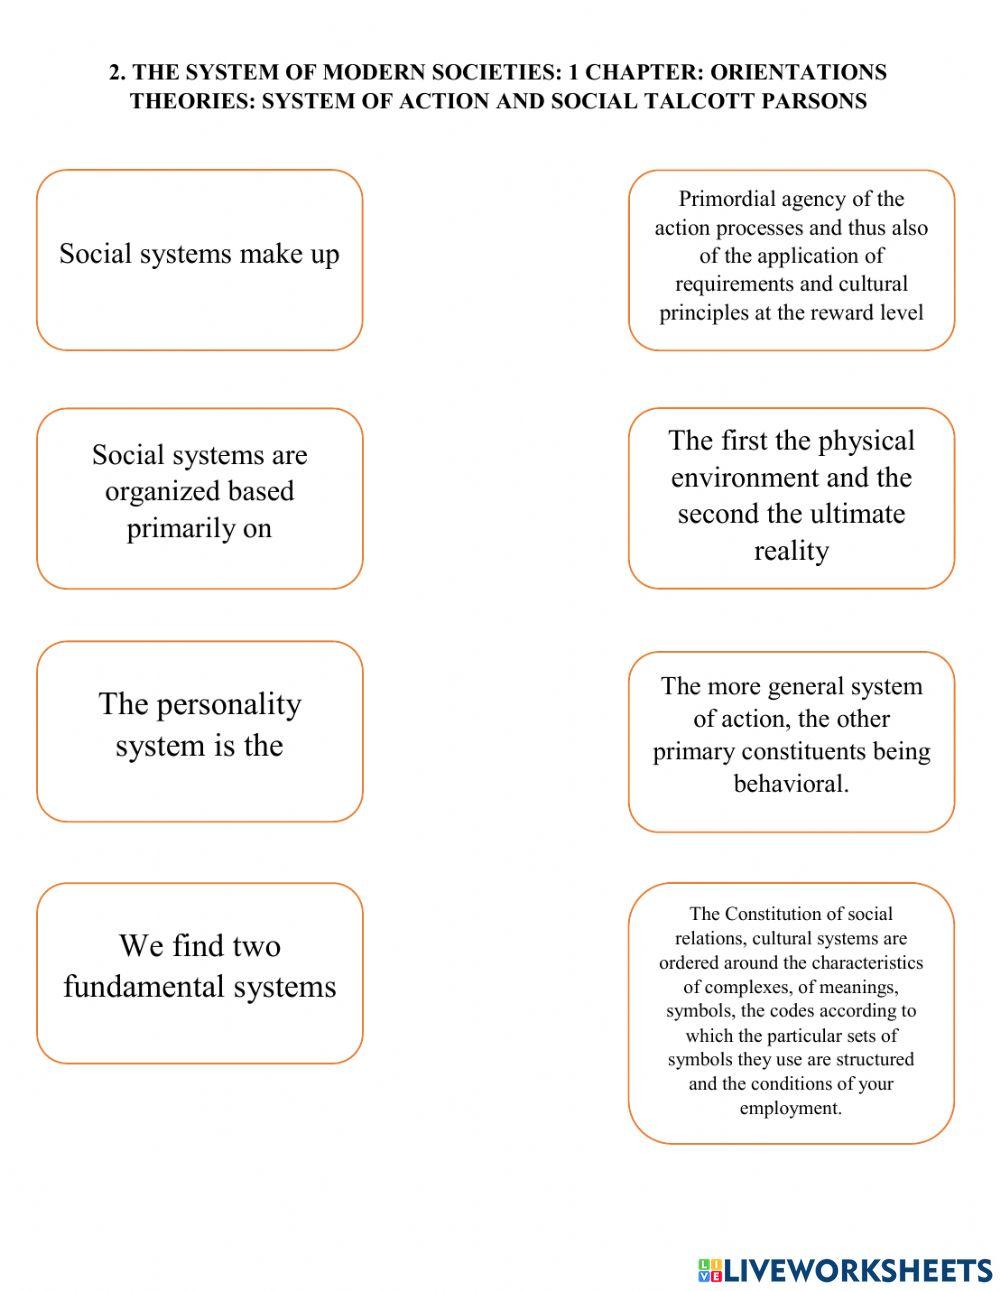 2. the system of modern societies 1 chapter orientations theories system of action and social talcott parsons